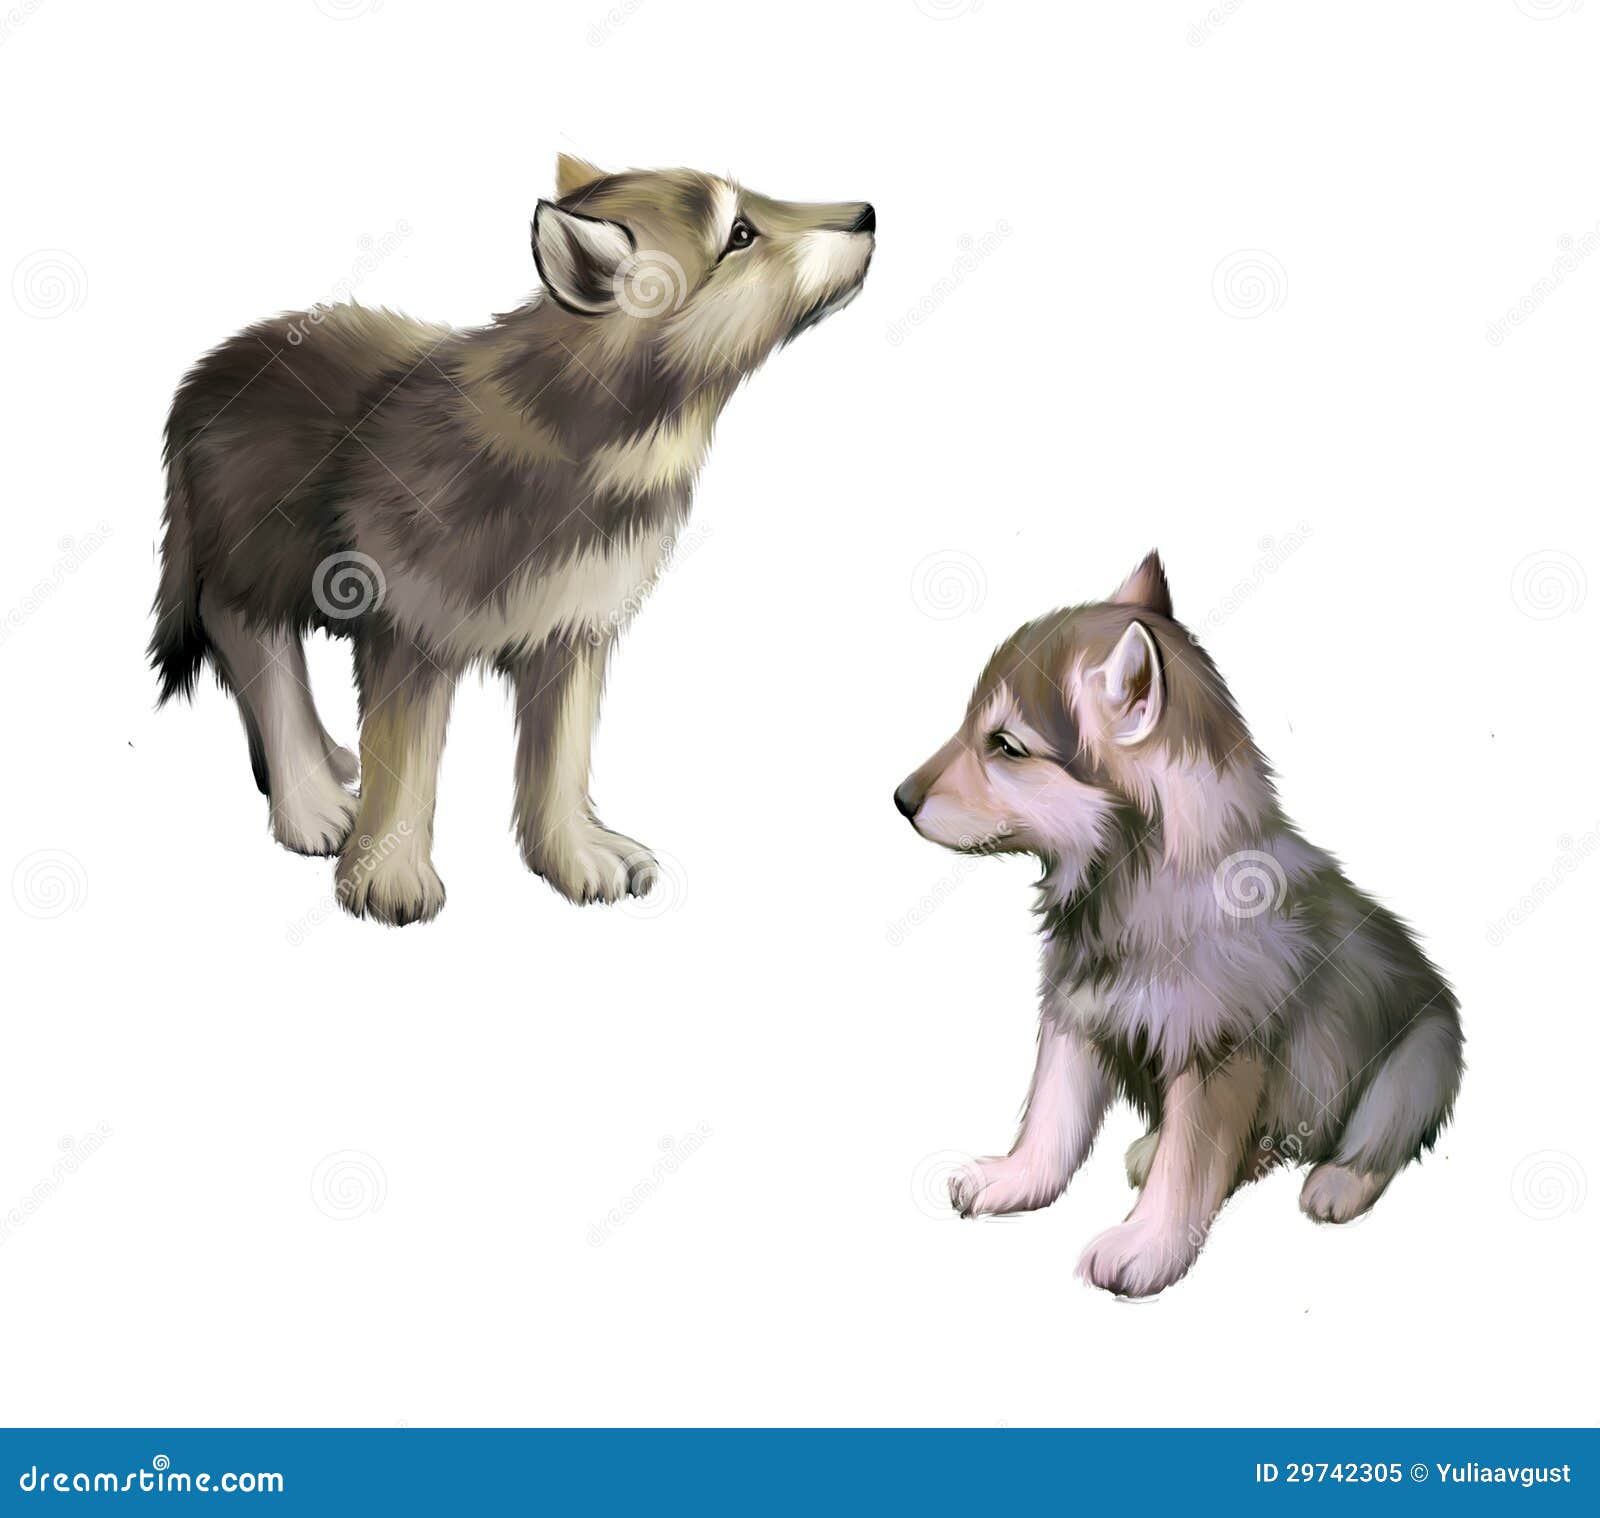 Gray wolf Puppy Anime Drawing BLUE WOLF transparent background PNG clipart   HiClipart